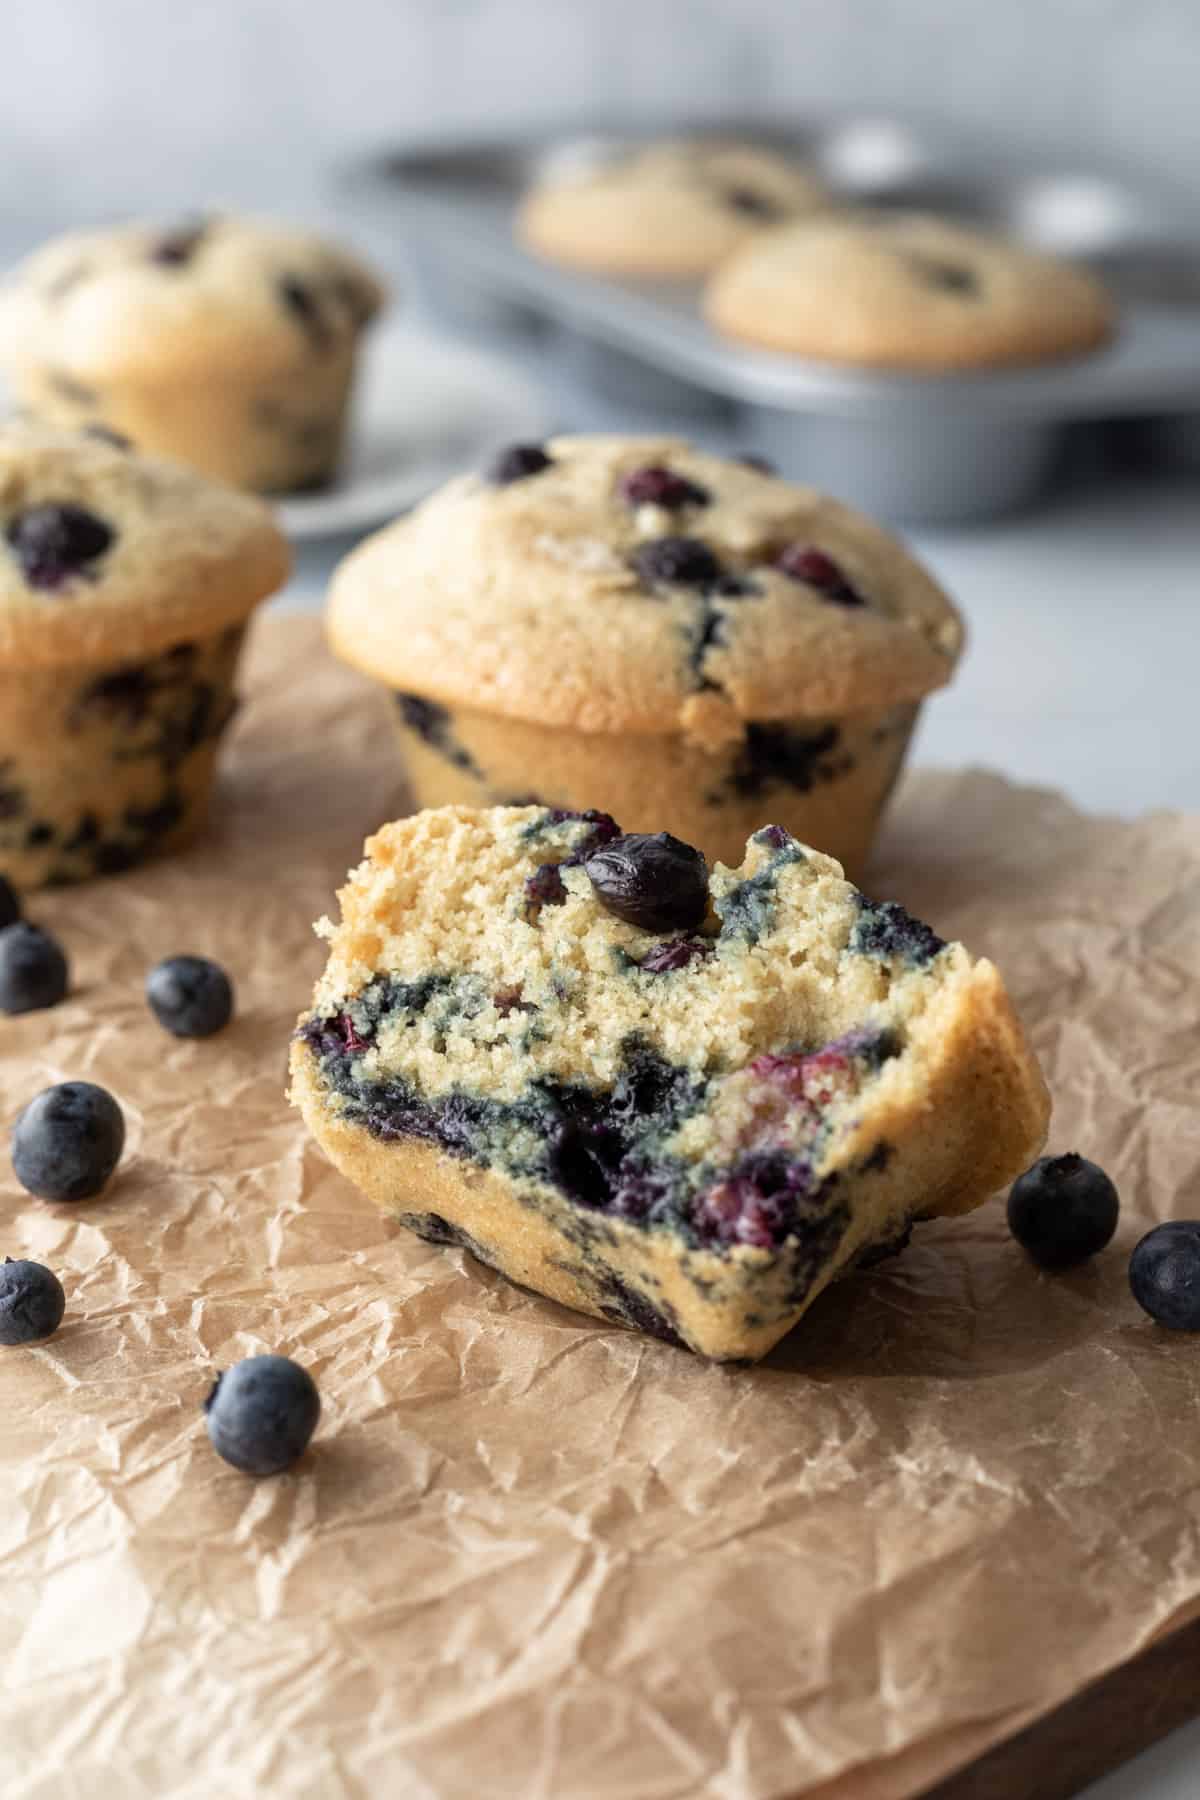 muffin cut in half showing moist, fluffy crumb and juicy berries inside.